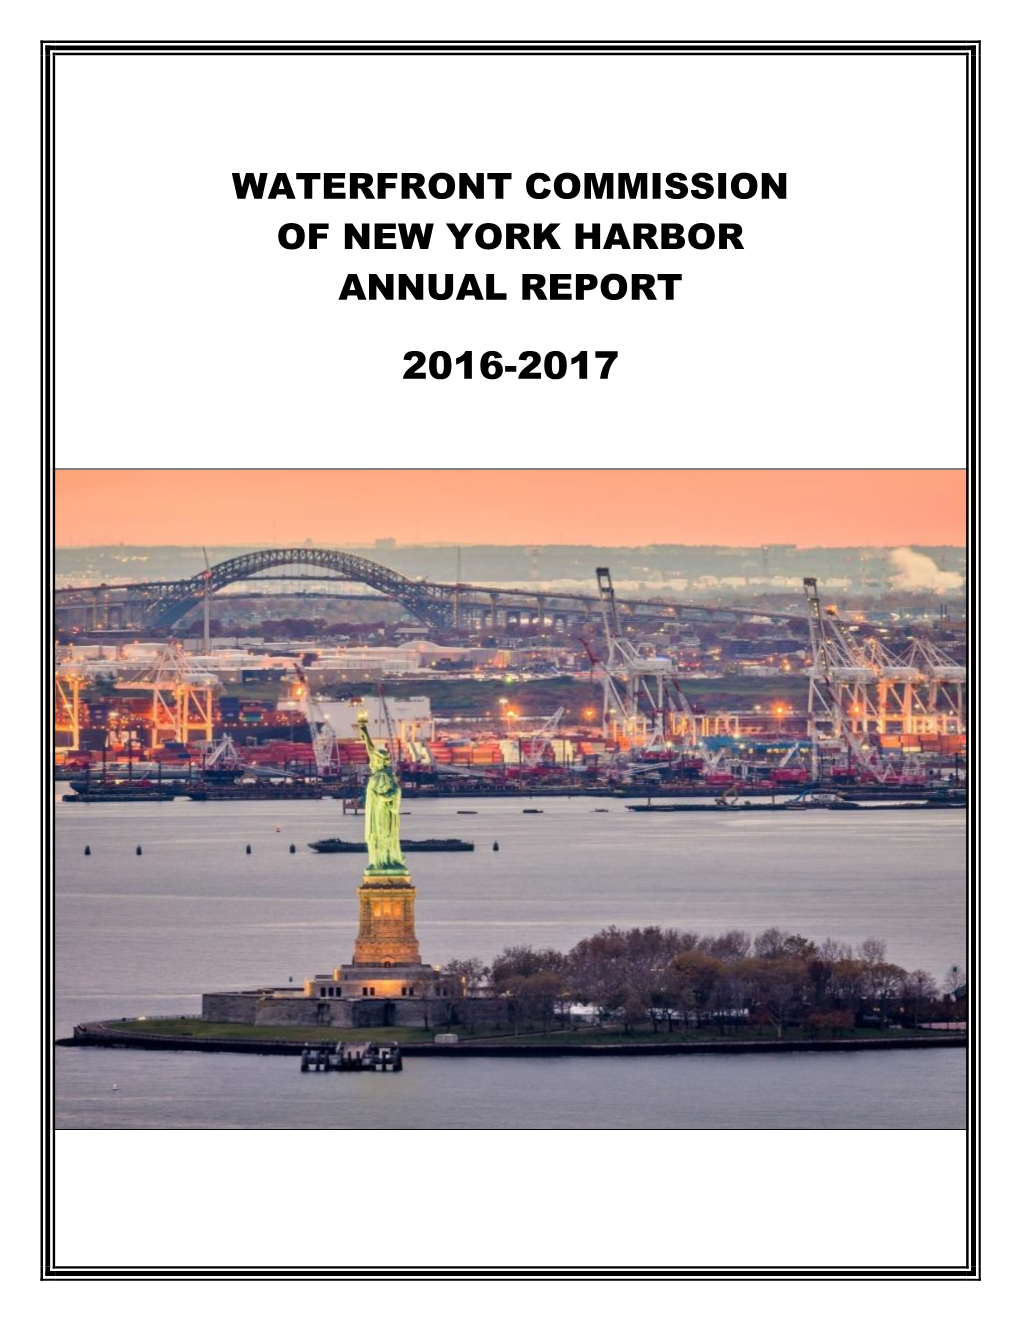 Waterfront Commission of New York Harbor Annual Report